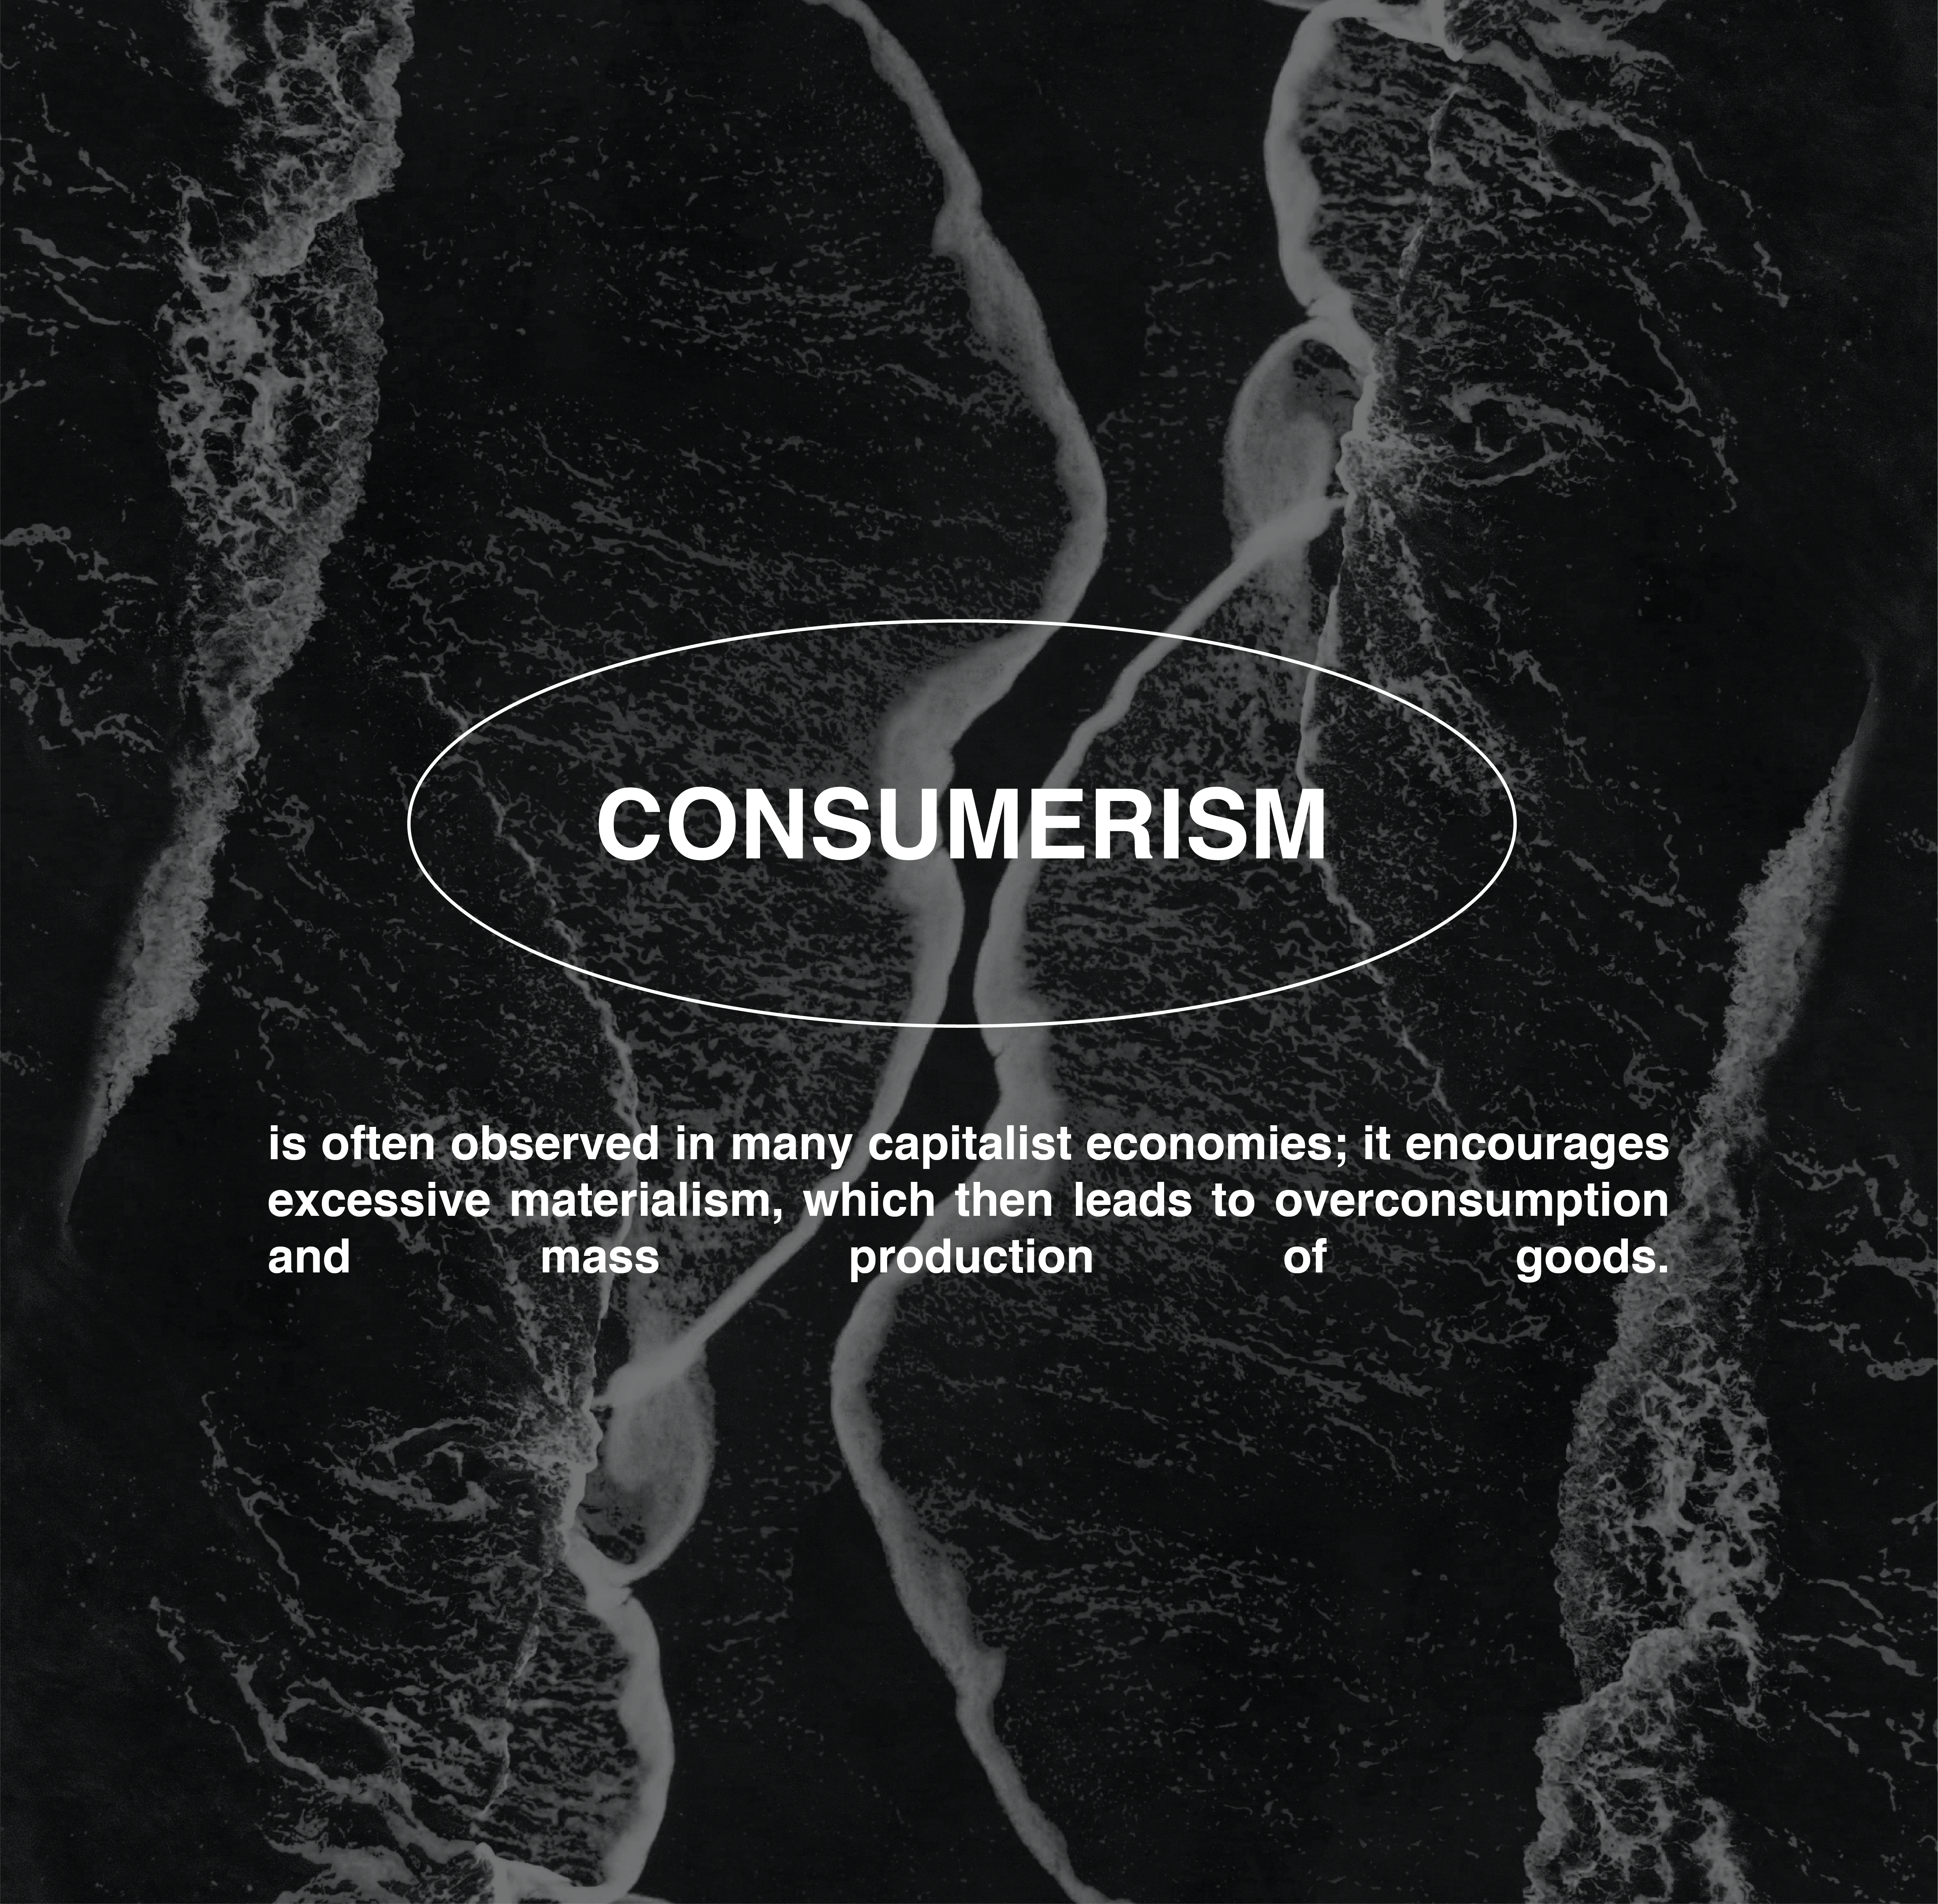 consumerism, definition, overconsumption, mass production, industry, business